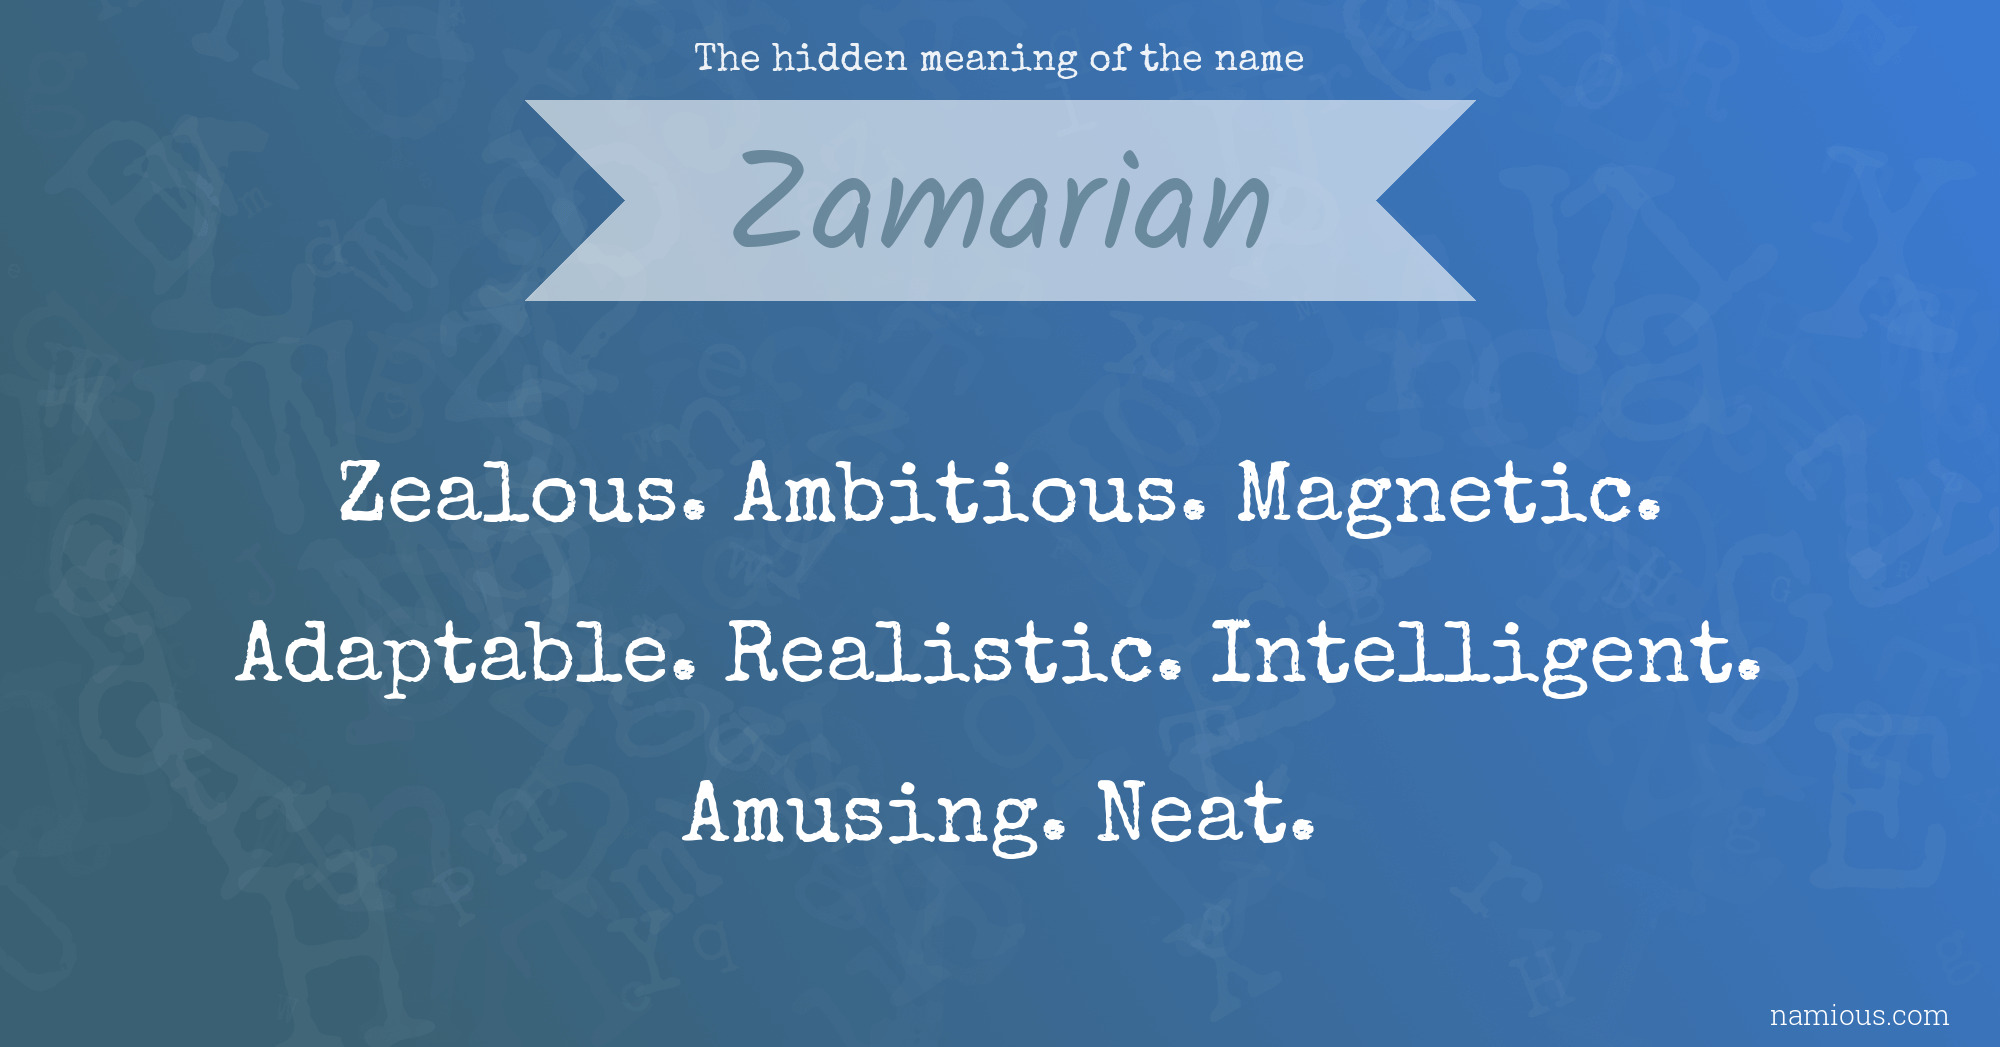 The hidden meaning of the name Zamarian